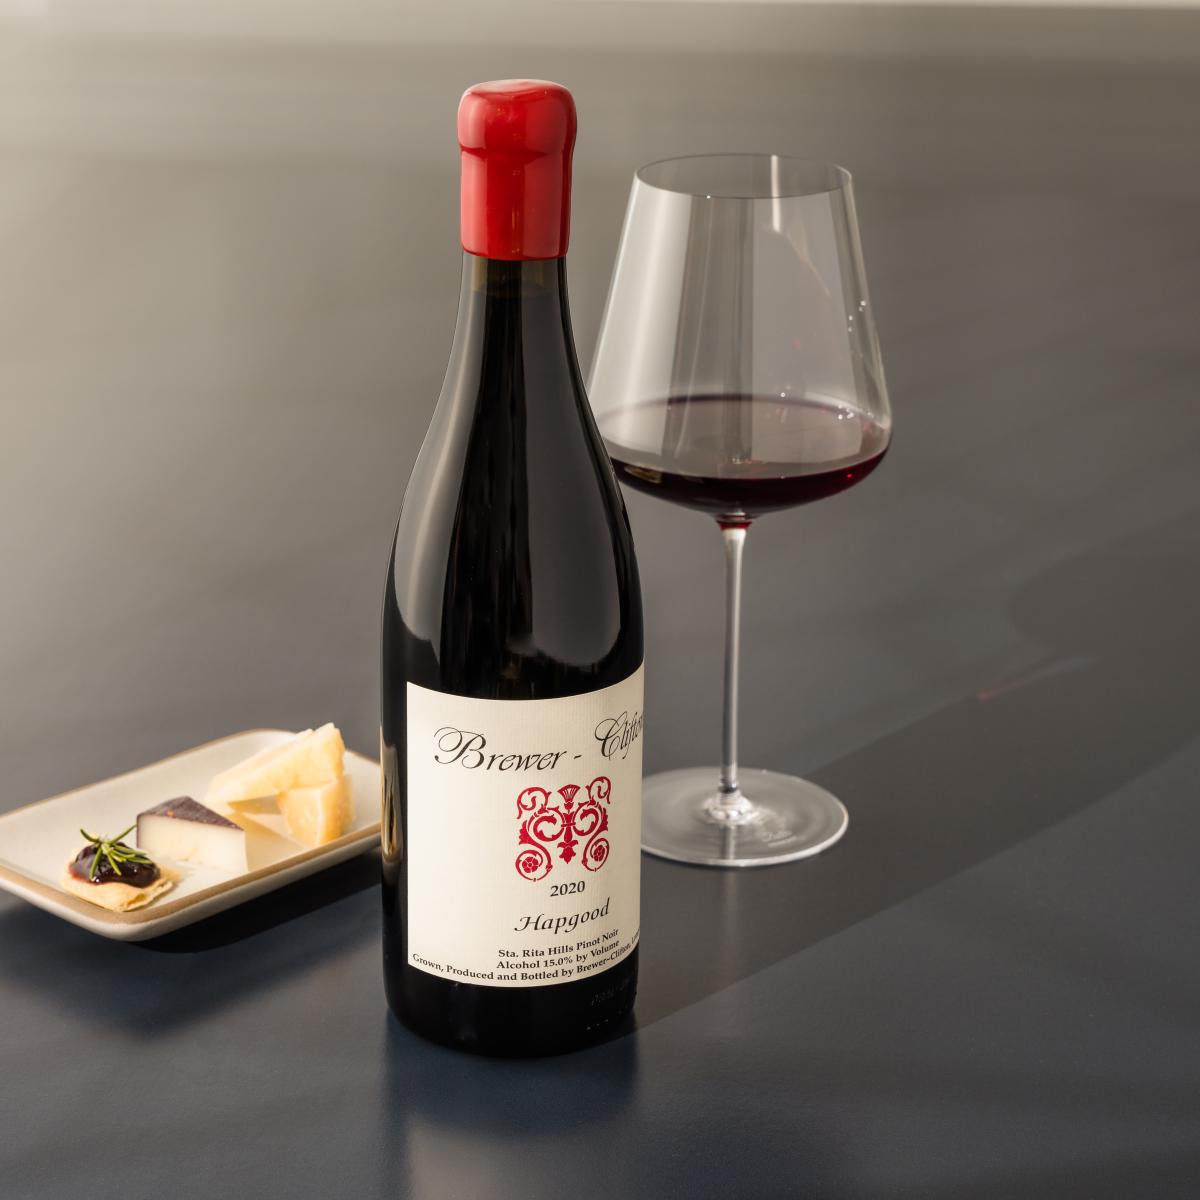 2020 Hapgood Pinot Noir with cheese 